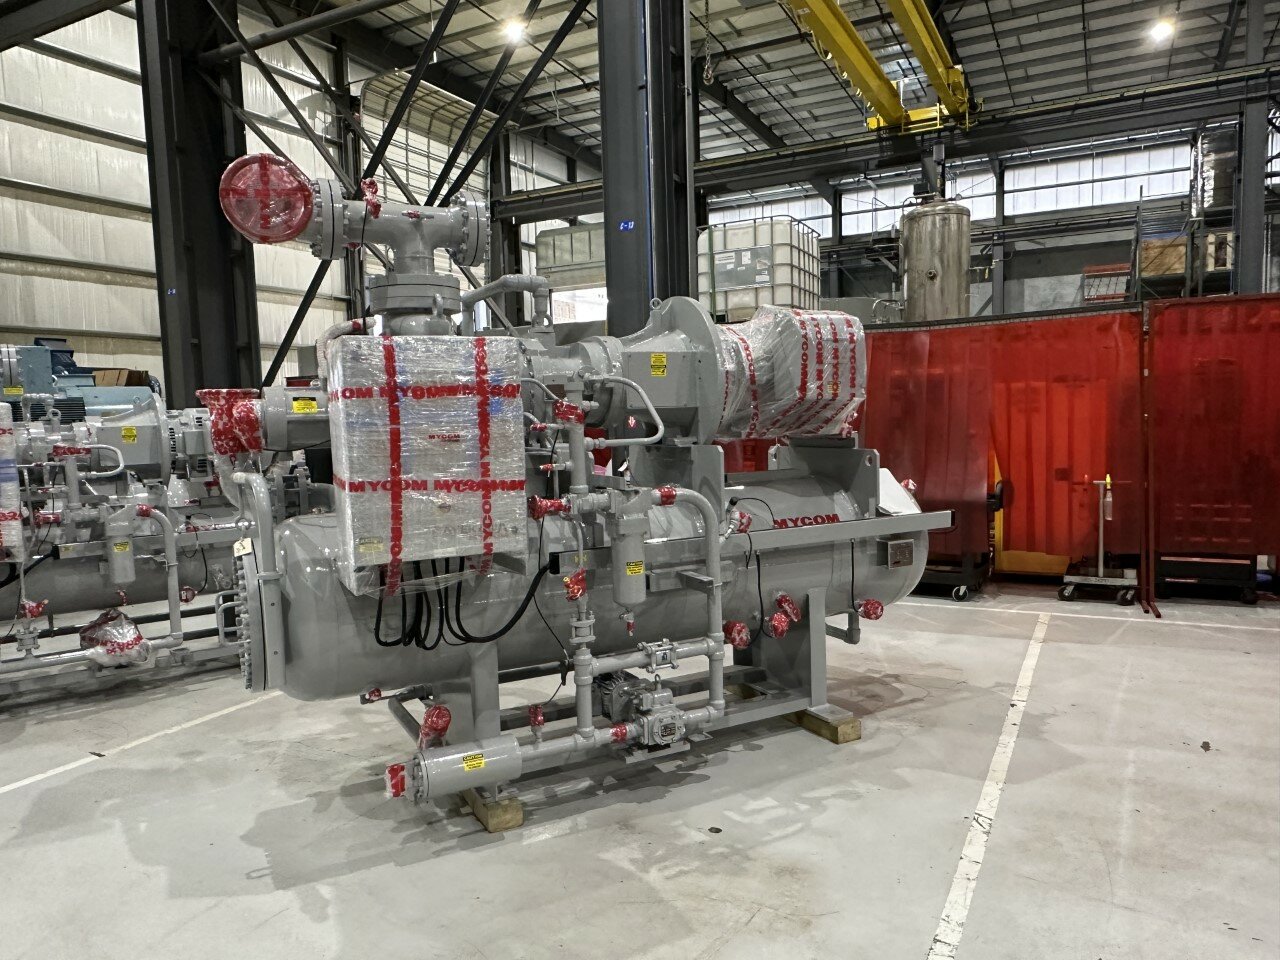 A recently-made compressor, made at the Katy Mayekawa plant, is wrapped and ready for shipment. The company manufactures compressors that serve the food, medical and oil and gas industries.